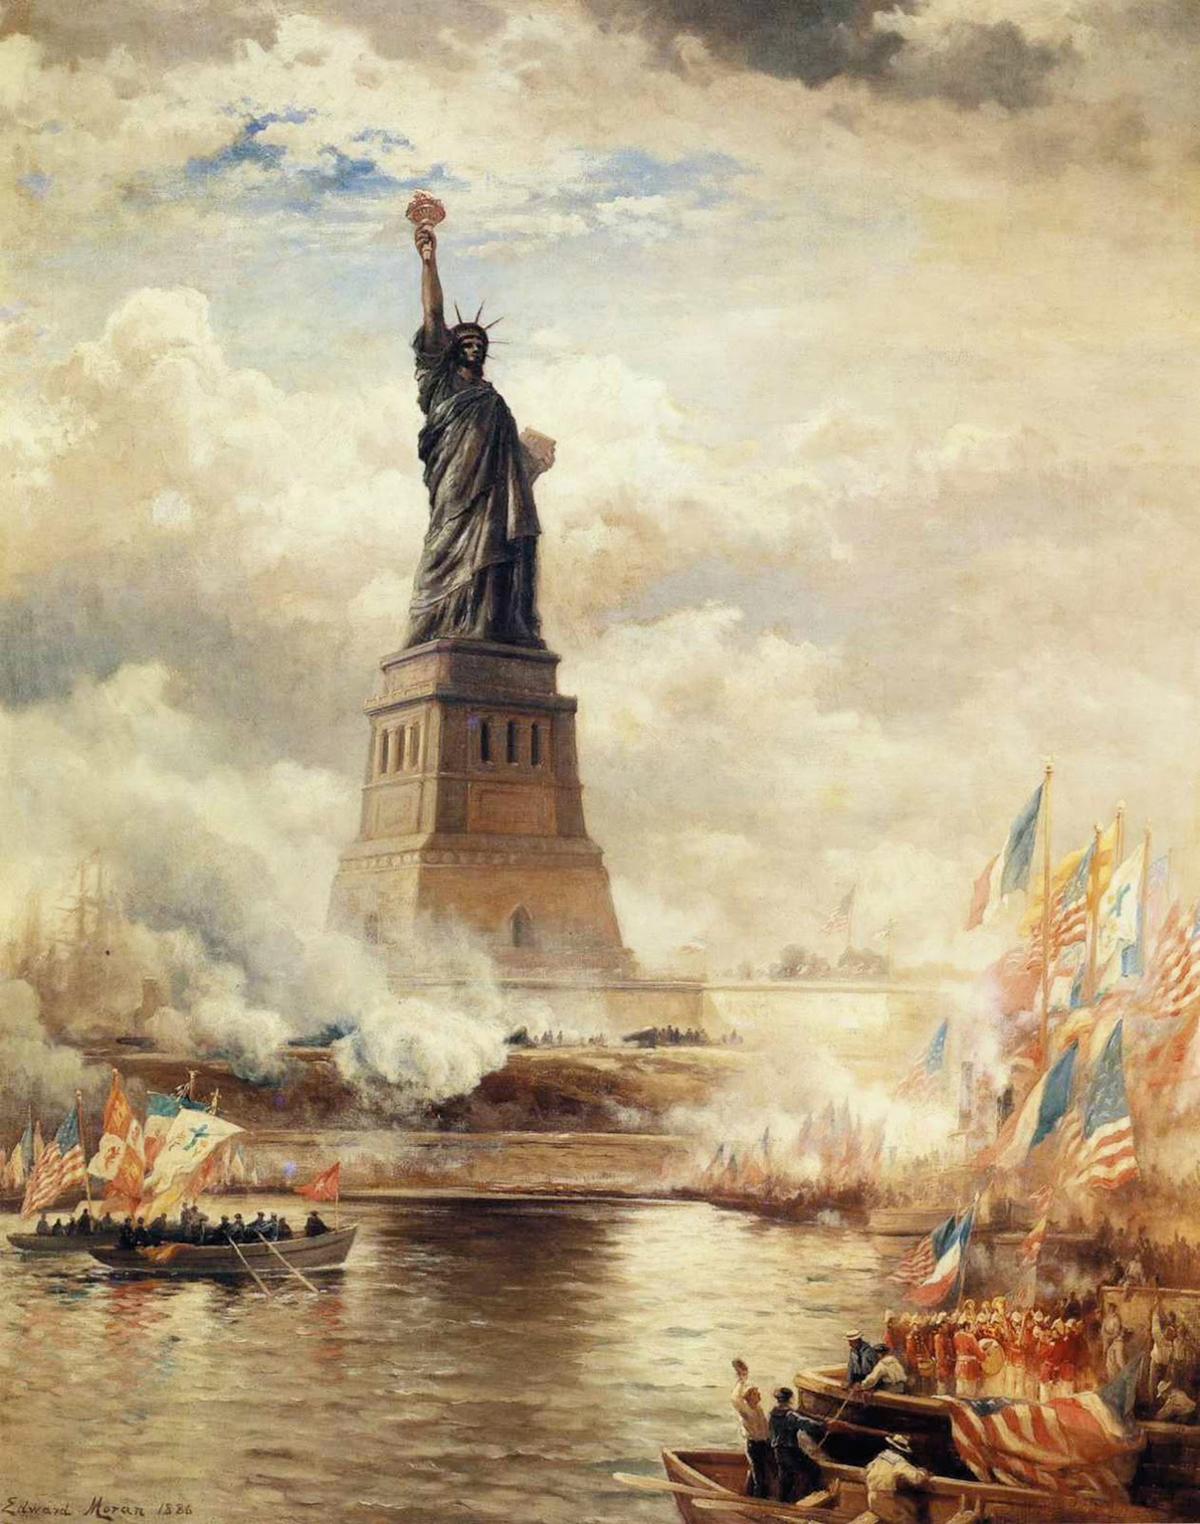 In 1886, thousands of spectators gathered in boats near Bedloe's Island for the dedication of the statue. "Unveiling the Statue of Liberty Enlightening the World," 1886, by Edward Moran. Oil on canvas. Museum of the City of New York, N.Y.  (Public Domain)